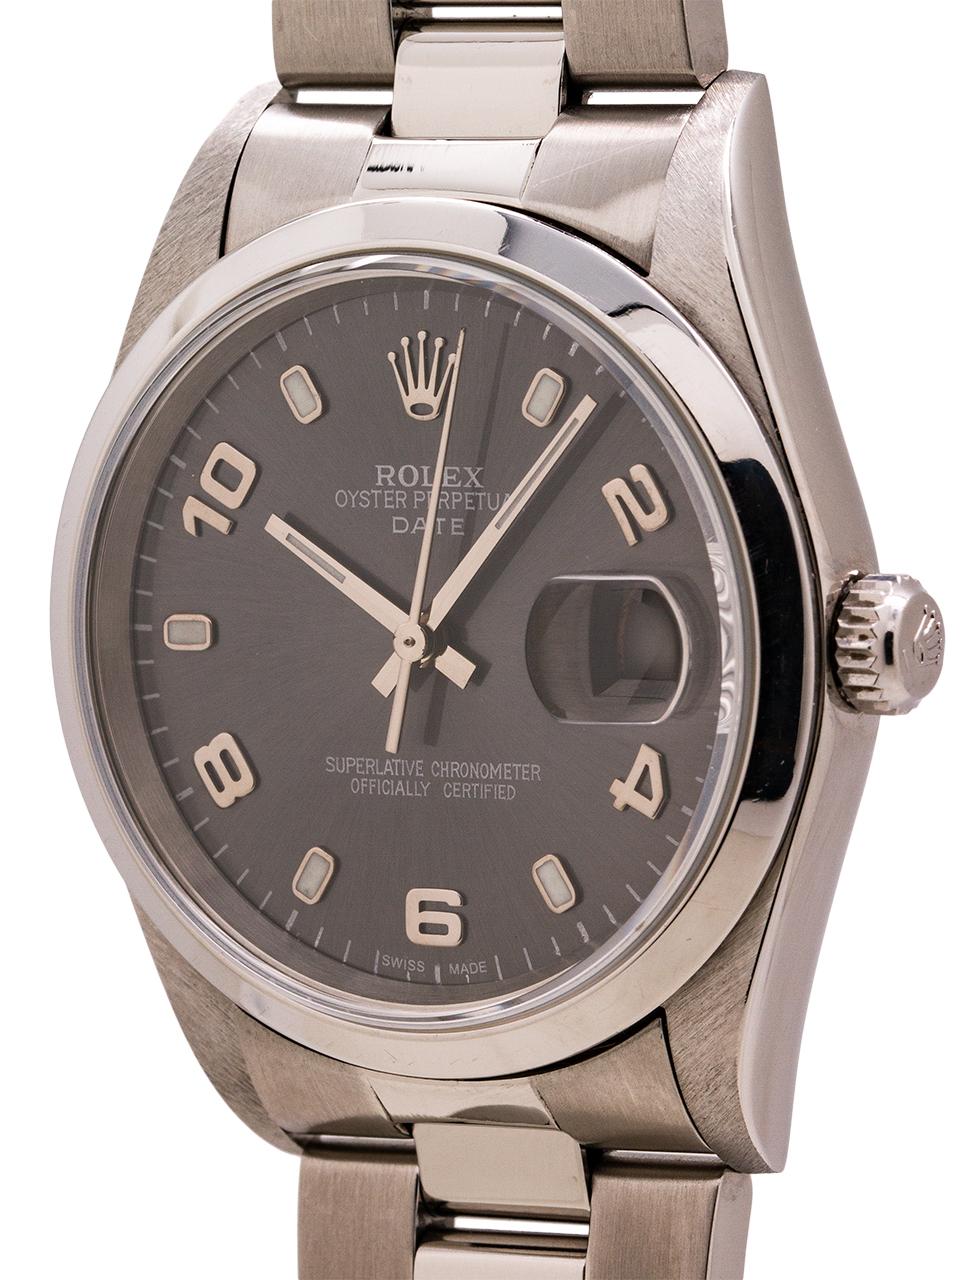 Rolex Oyster Perpetual Date Ref 15200 Stainless Steel circa 2002 Anthracite Gray In Excellent Condition For Sale In West Hollywood, CA